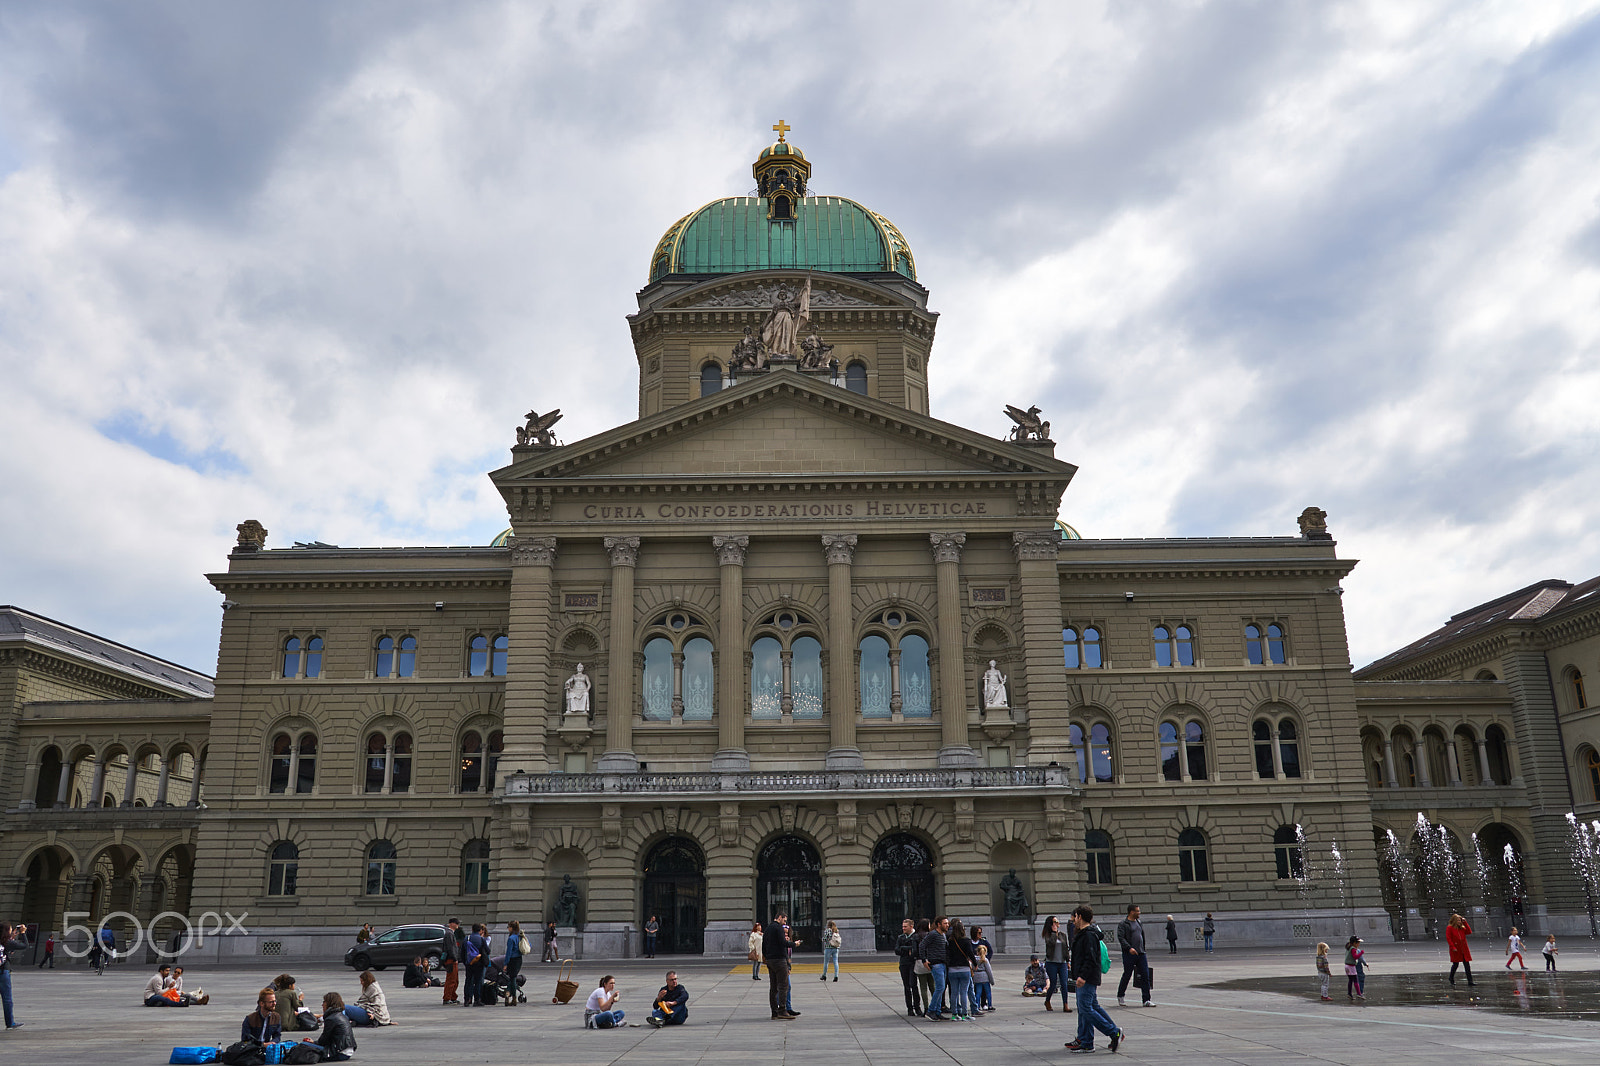 Sony a6300 sample photo. A cloudy view over the bundeshaus photography